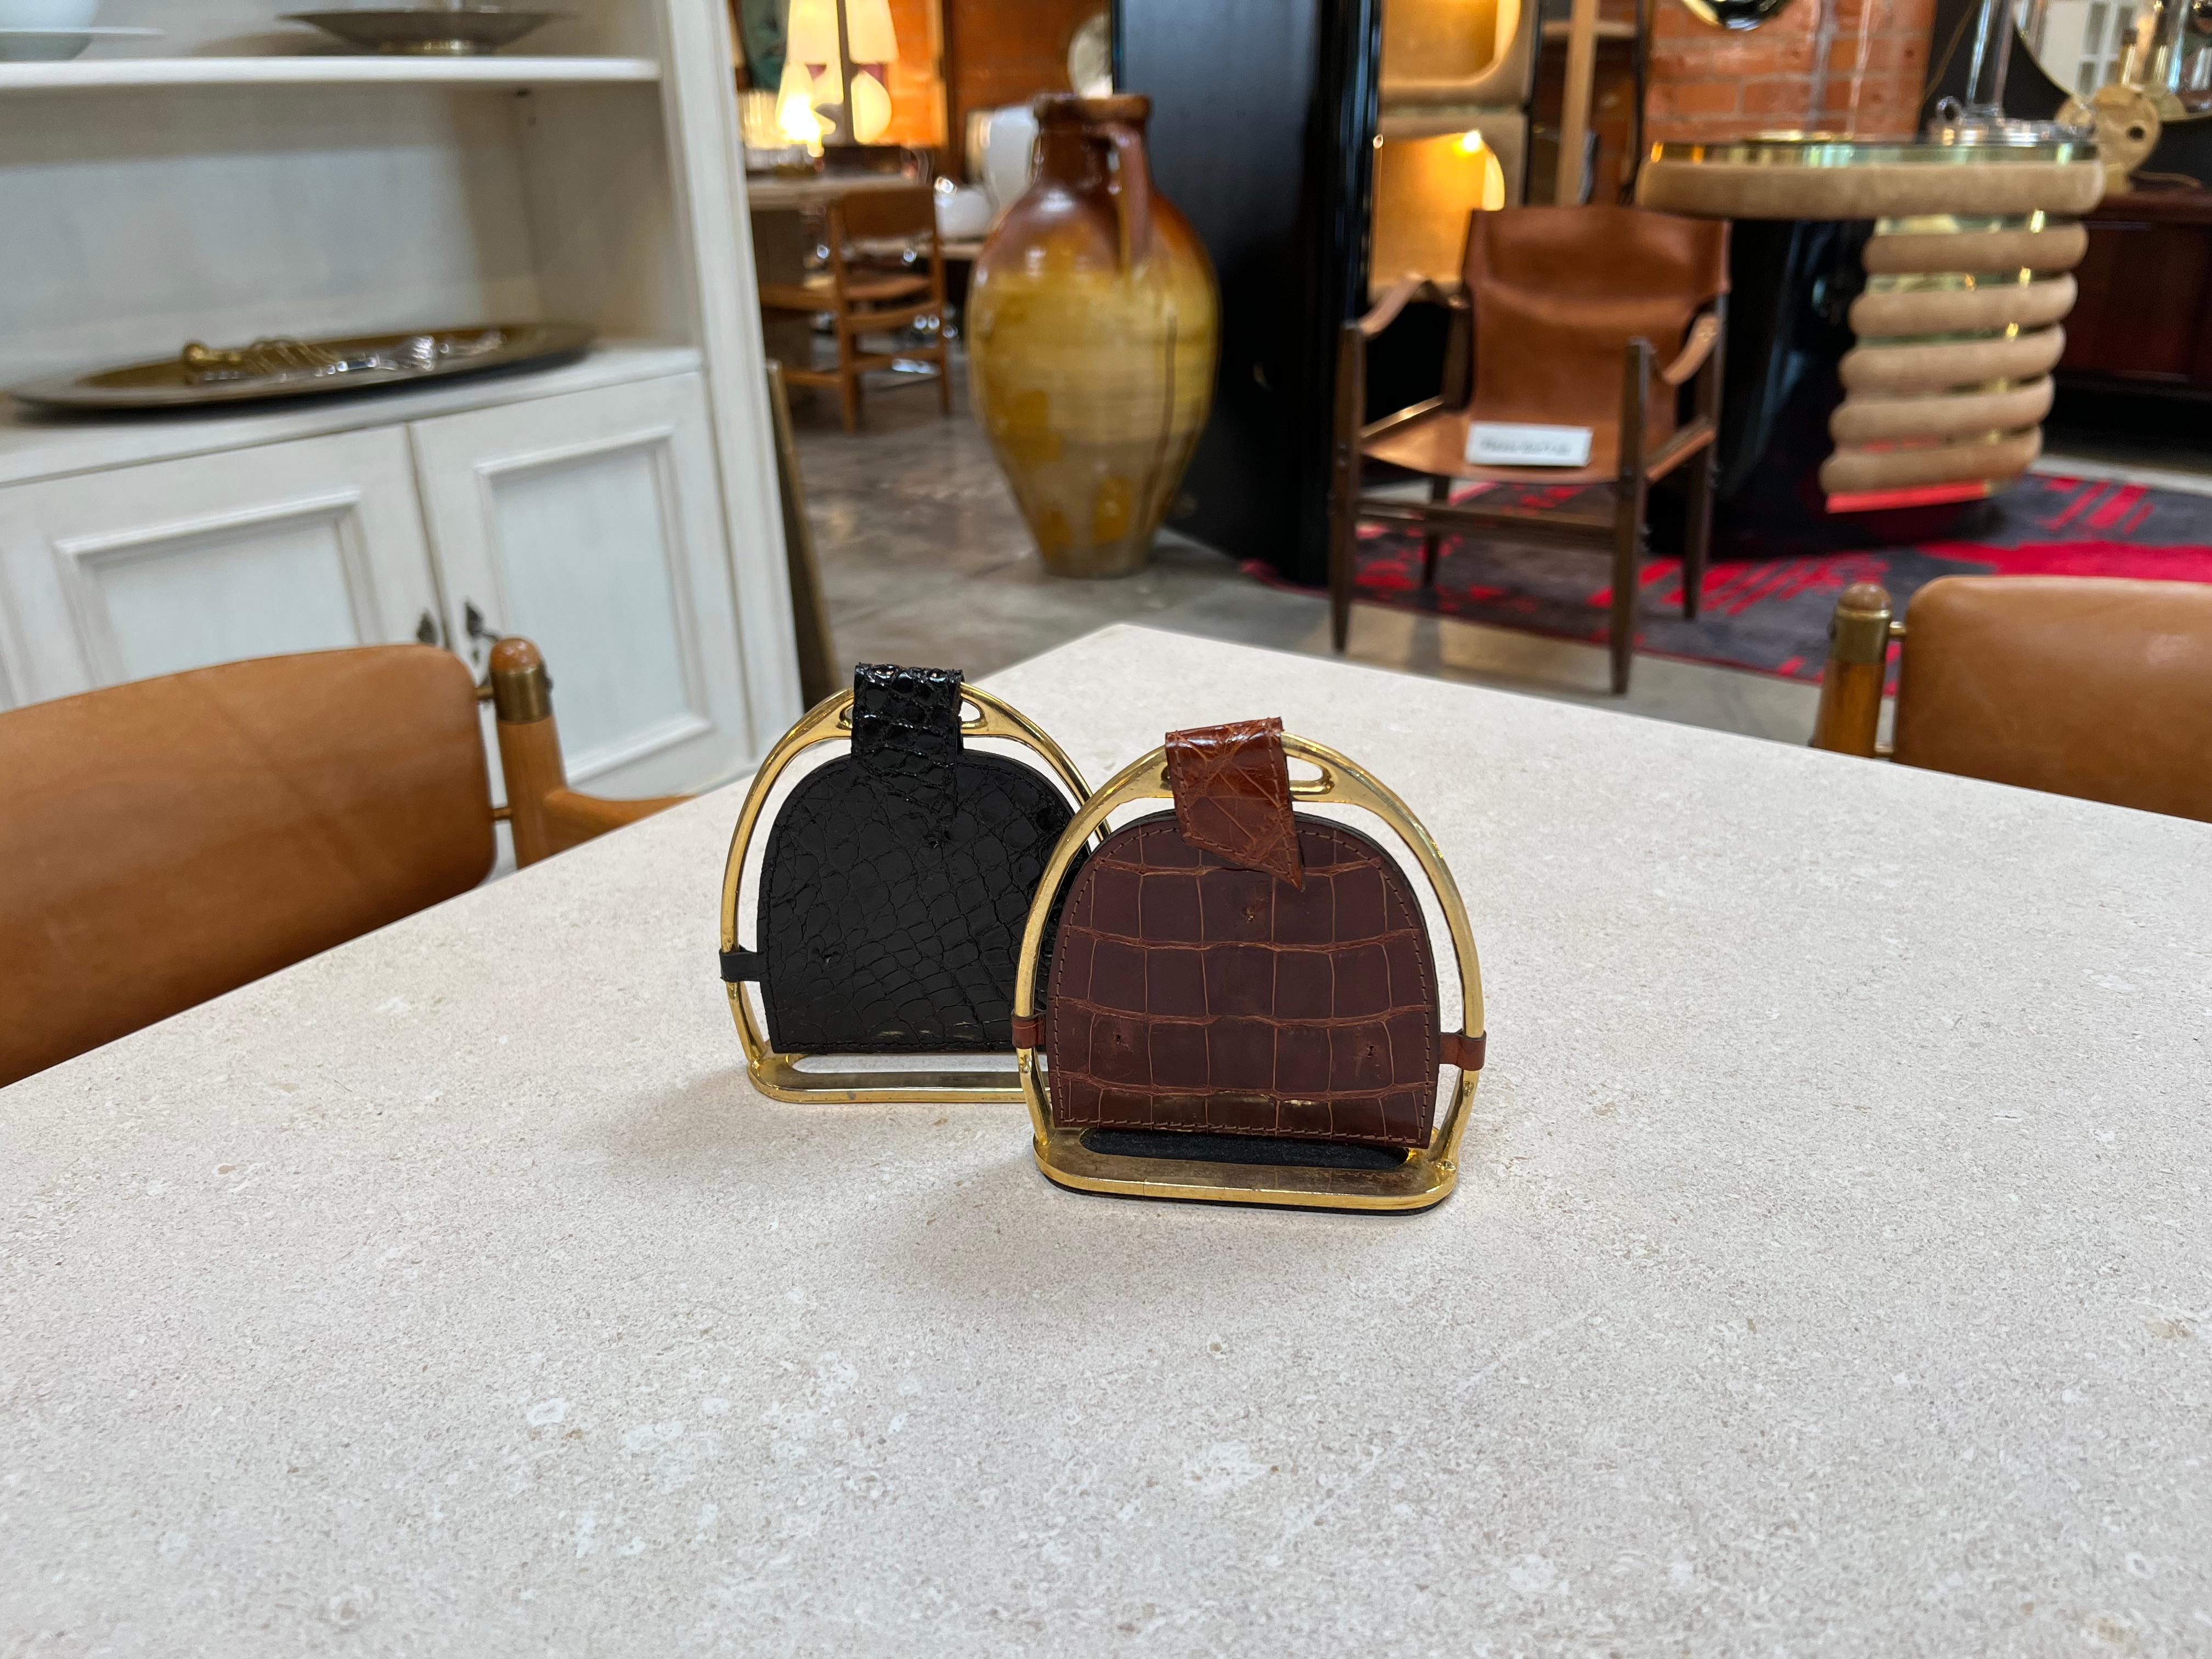 The Vintage Gucci Book Ends from the 1980s are stylish and luxurious accessories designed to hold books in place while adding a touch of sophistication to any space. Made by the renowned fashion house Gucci, these bookends feature the iconic Gucci